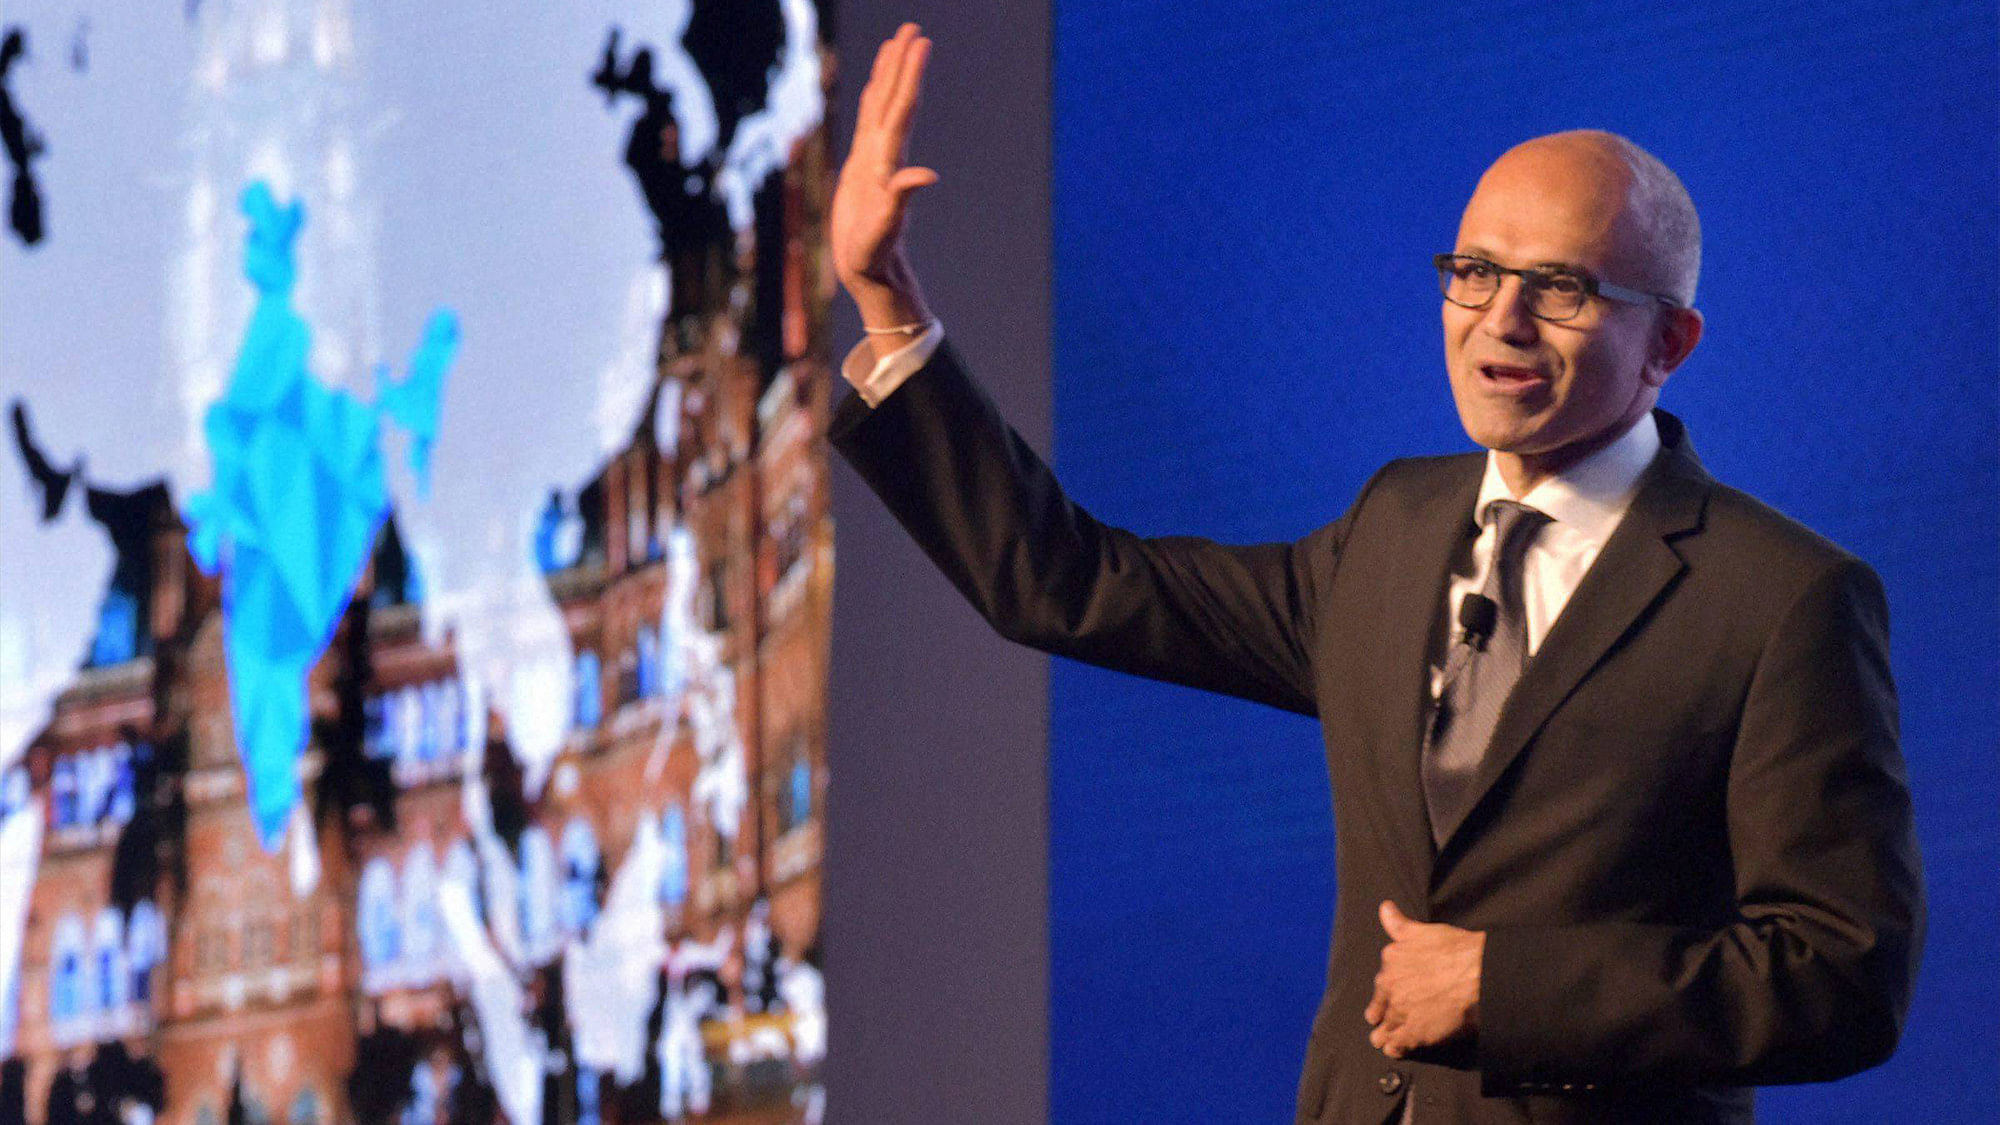 Microsoft CEO Satya Nadella gestures while delivering a keynote address at Microsofts Future Unleashed event in Mumbai on Thursday. (Photo: PTI)